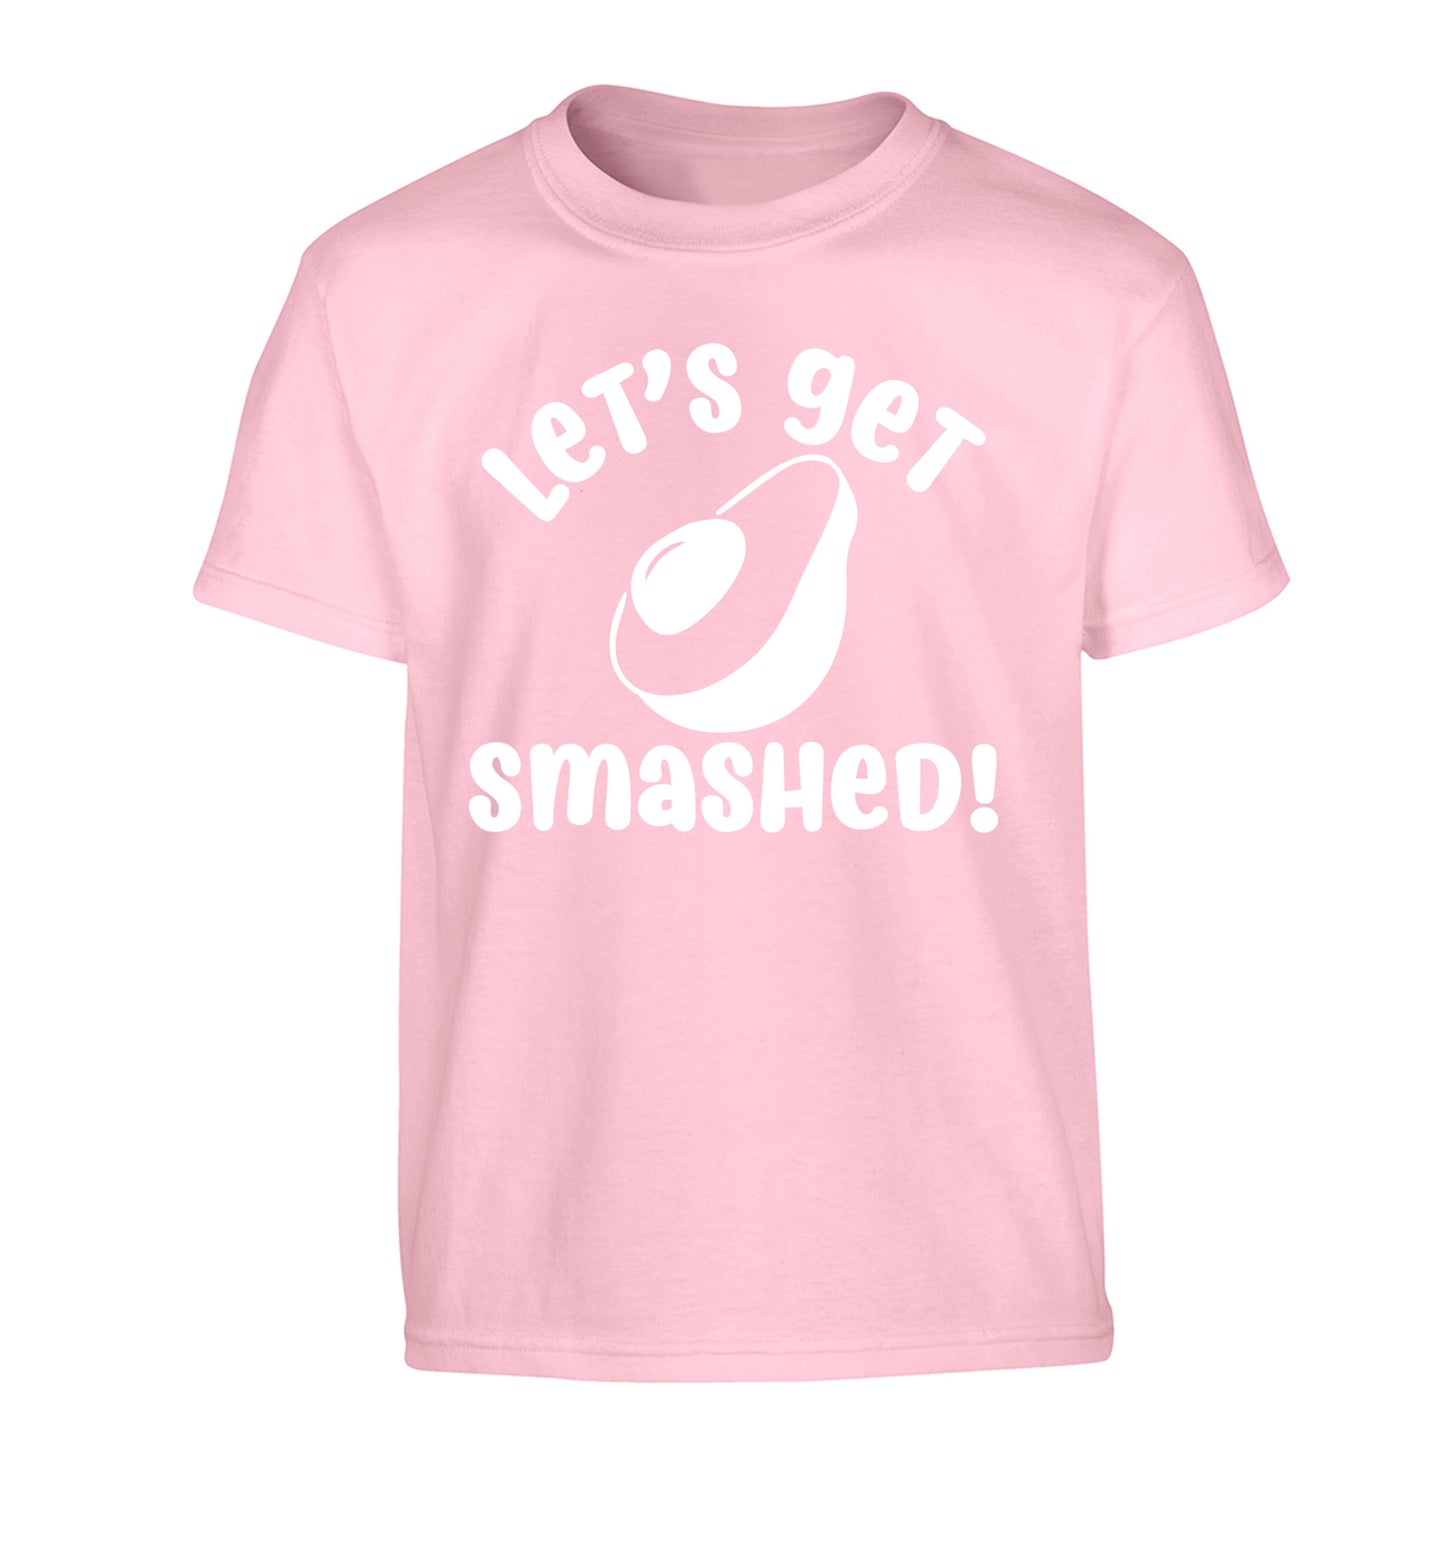 Let's get smashed Children's light pink Tshirt 12-14 Years